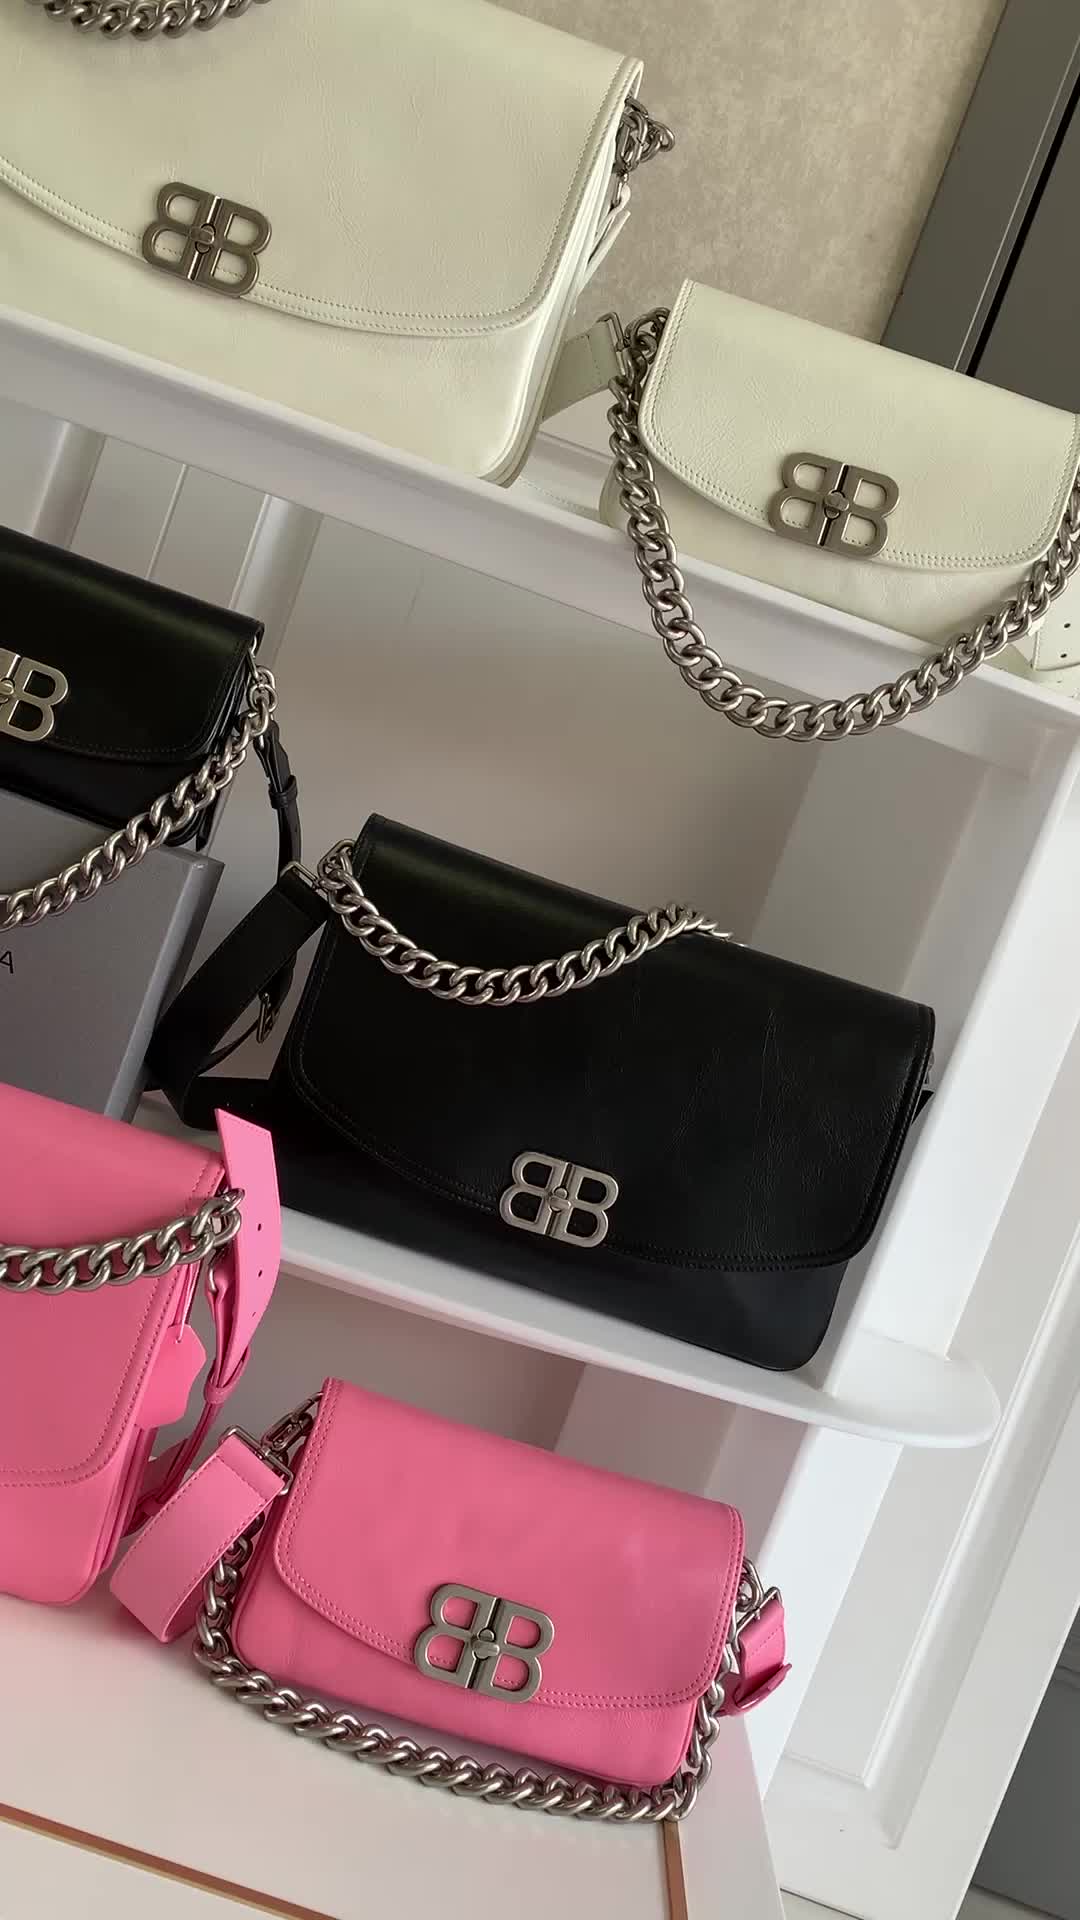 Balenciaga Bags(4A)-Other Styles most desired ID: BY8264